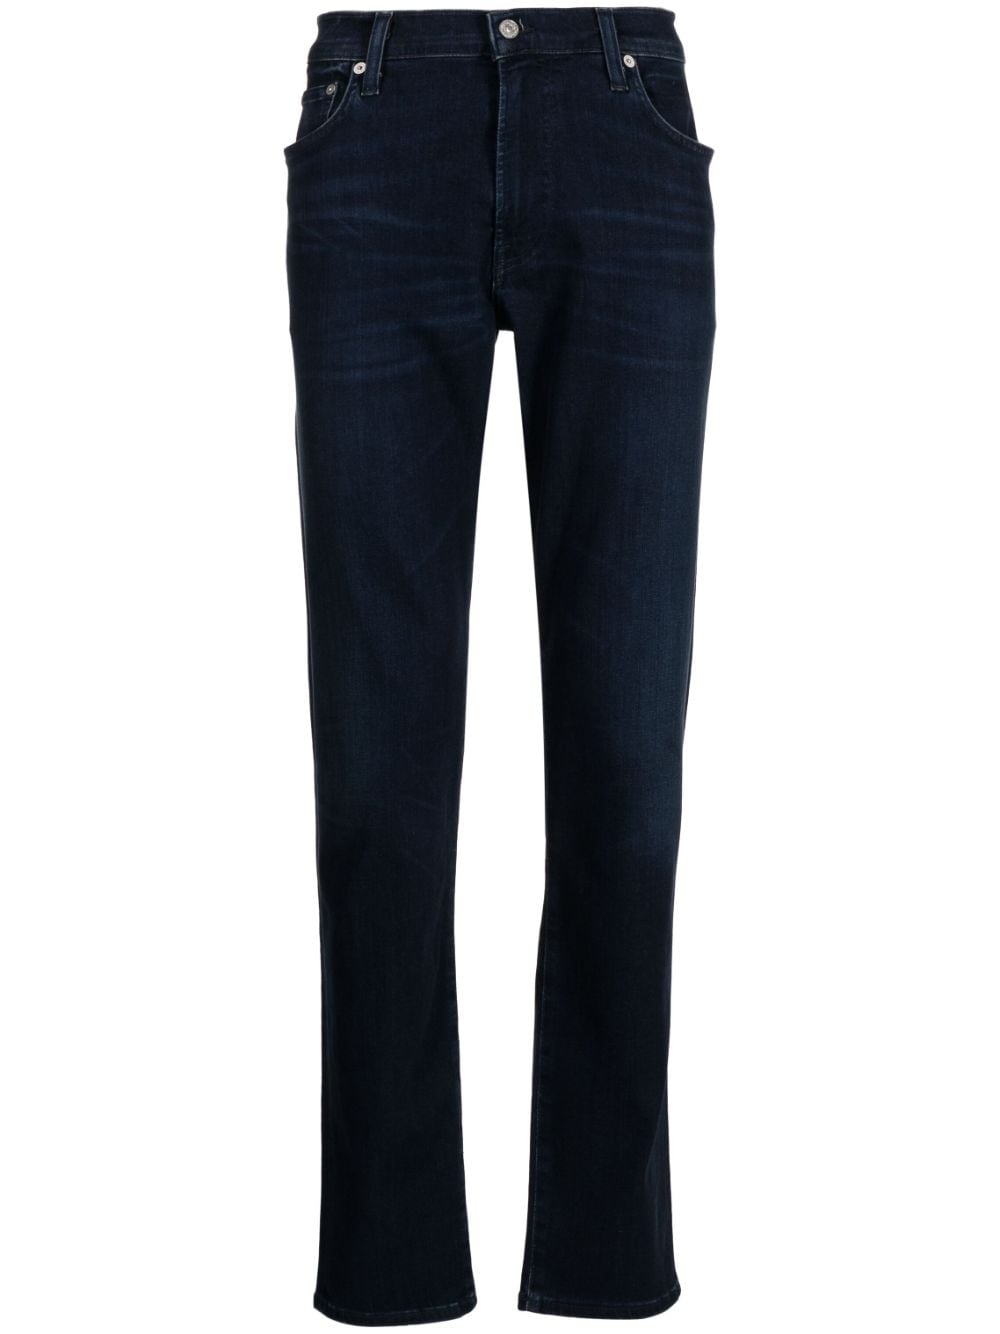 Citizens of Humanity Adler straight-leg jeans - Blue von Citizens of Humanity